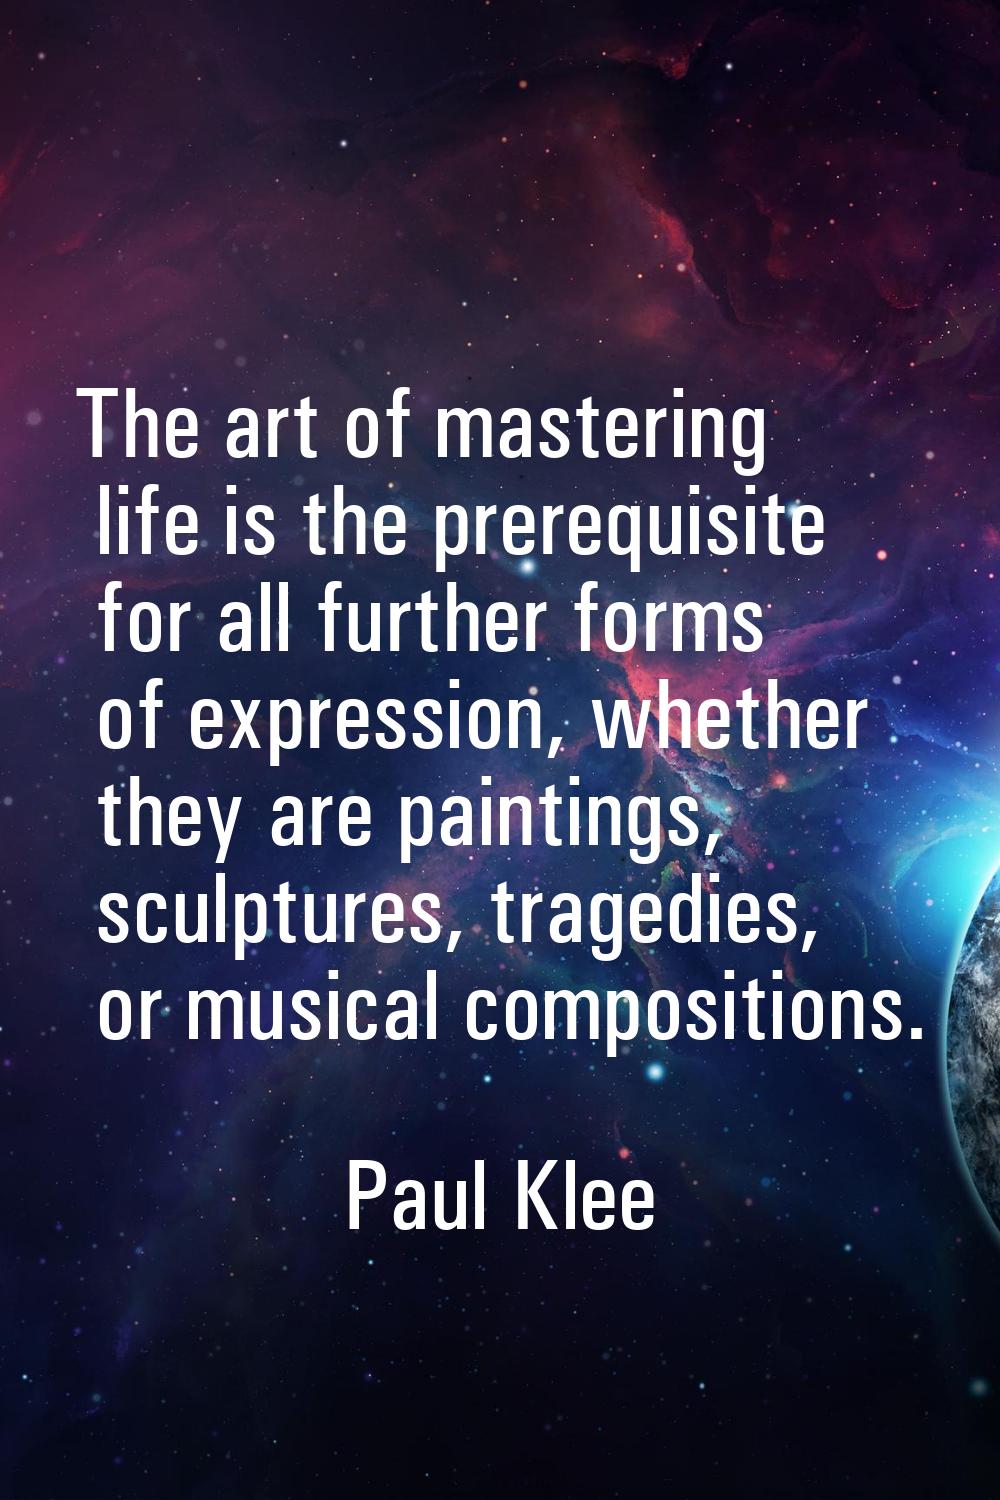 The art of mastering life is the prerequisite for all further forms of expression, whether they are